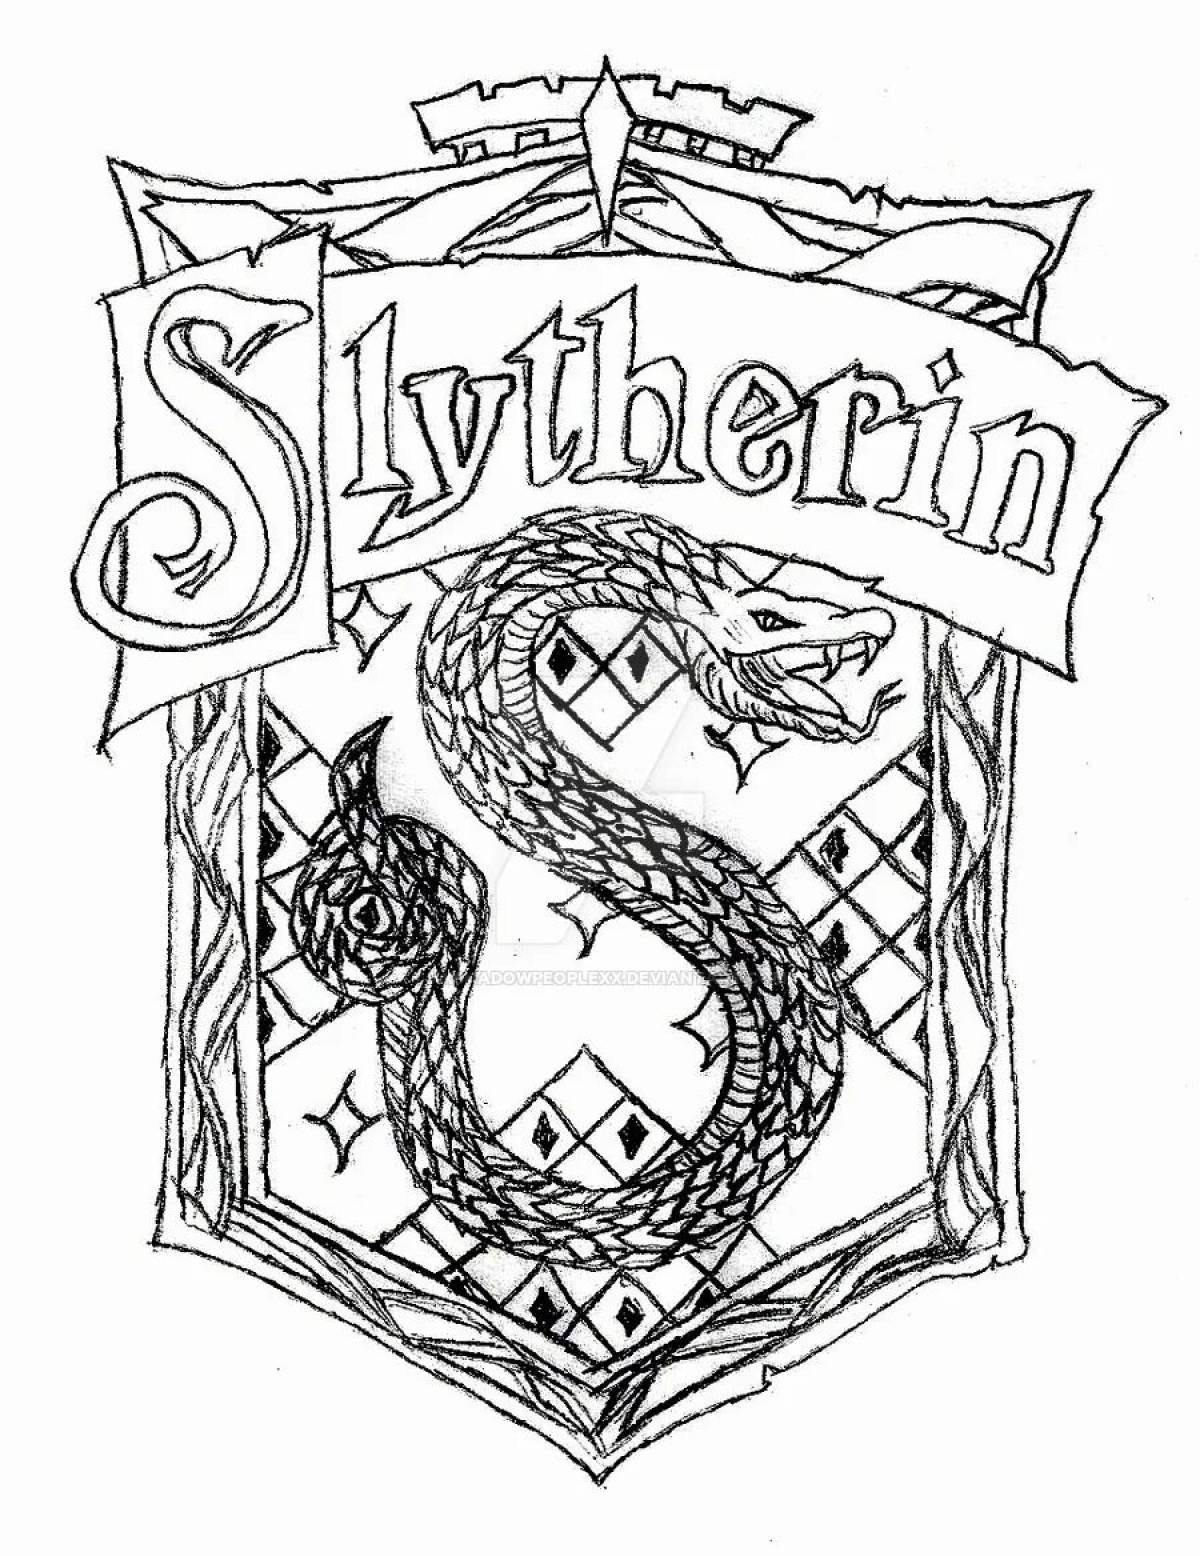 Slytherin coat of arms #11